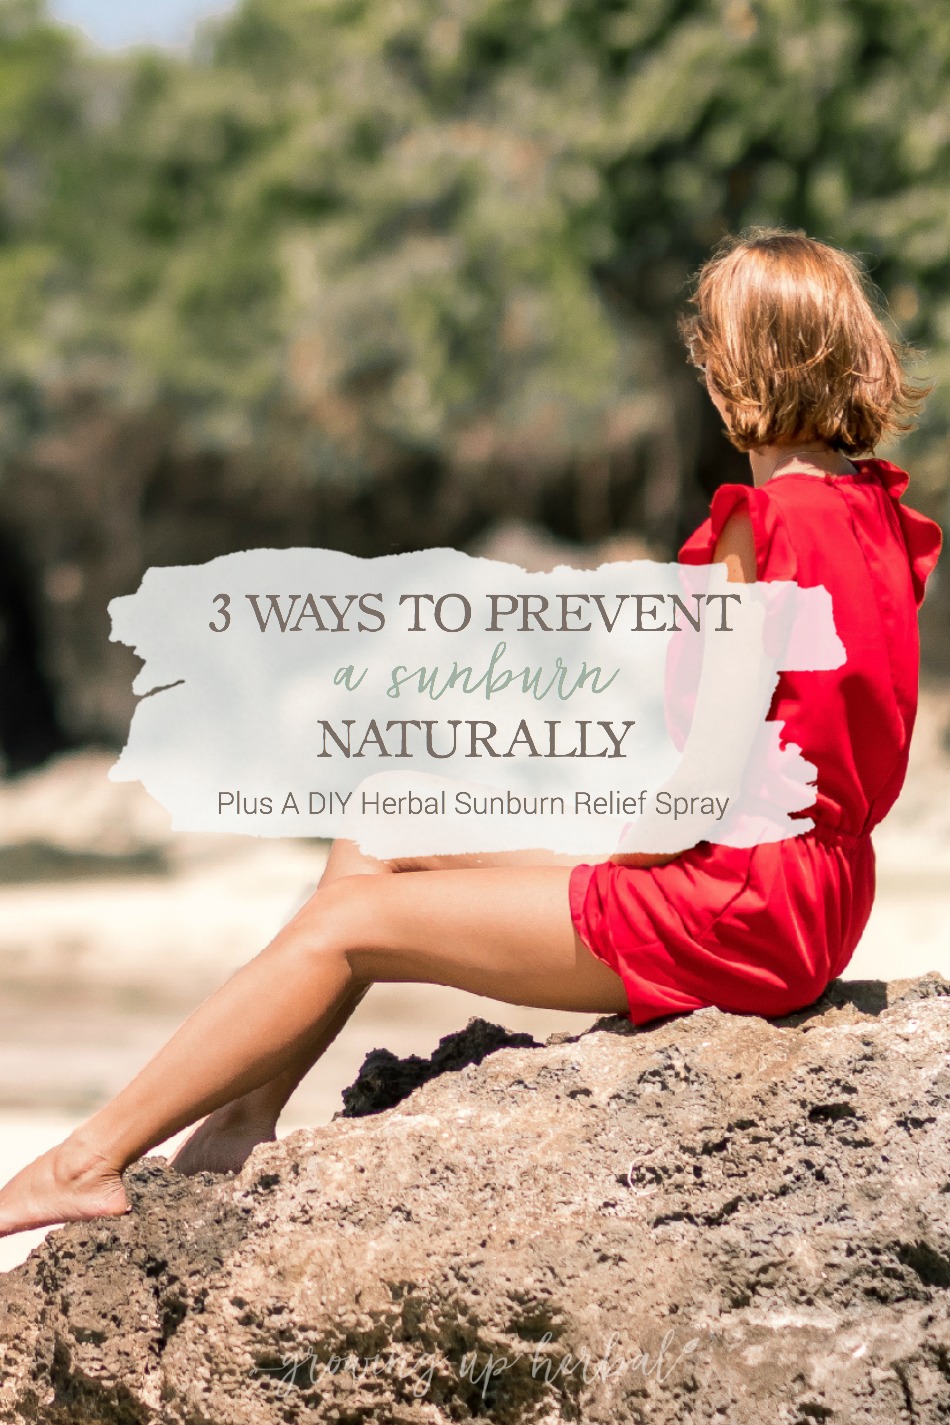 3 Ways To Prevent A Sunburn Naturally + A DIY Herbal Sunburn Relief Spray | Growing Up Herbal | Learn how to prevent sunburns naturally, and get a DIY herbal remedy for those times when sunburns sneak up on you!